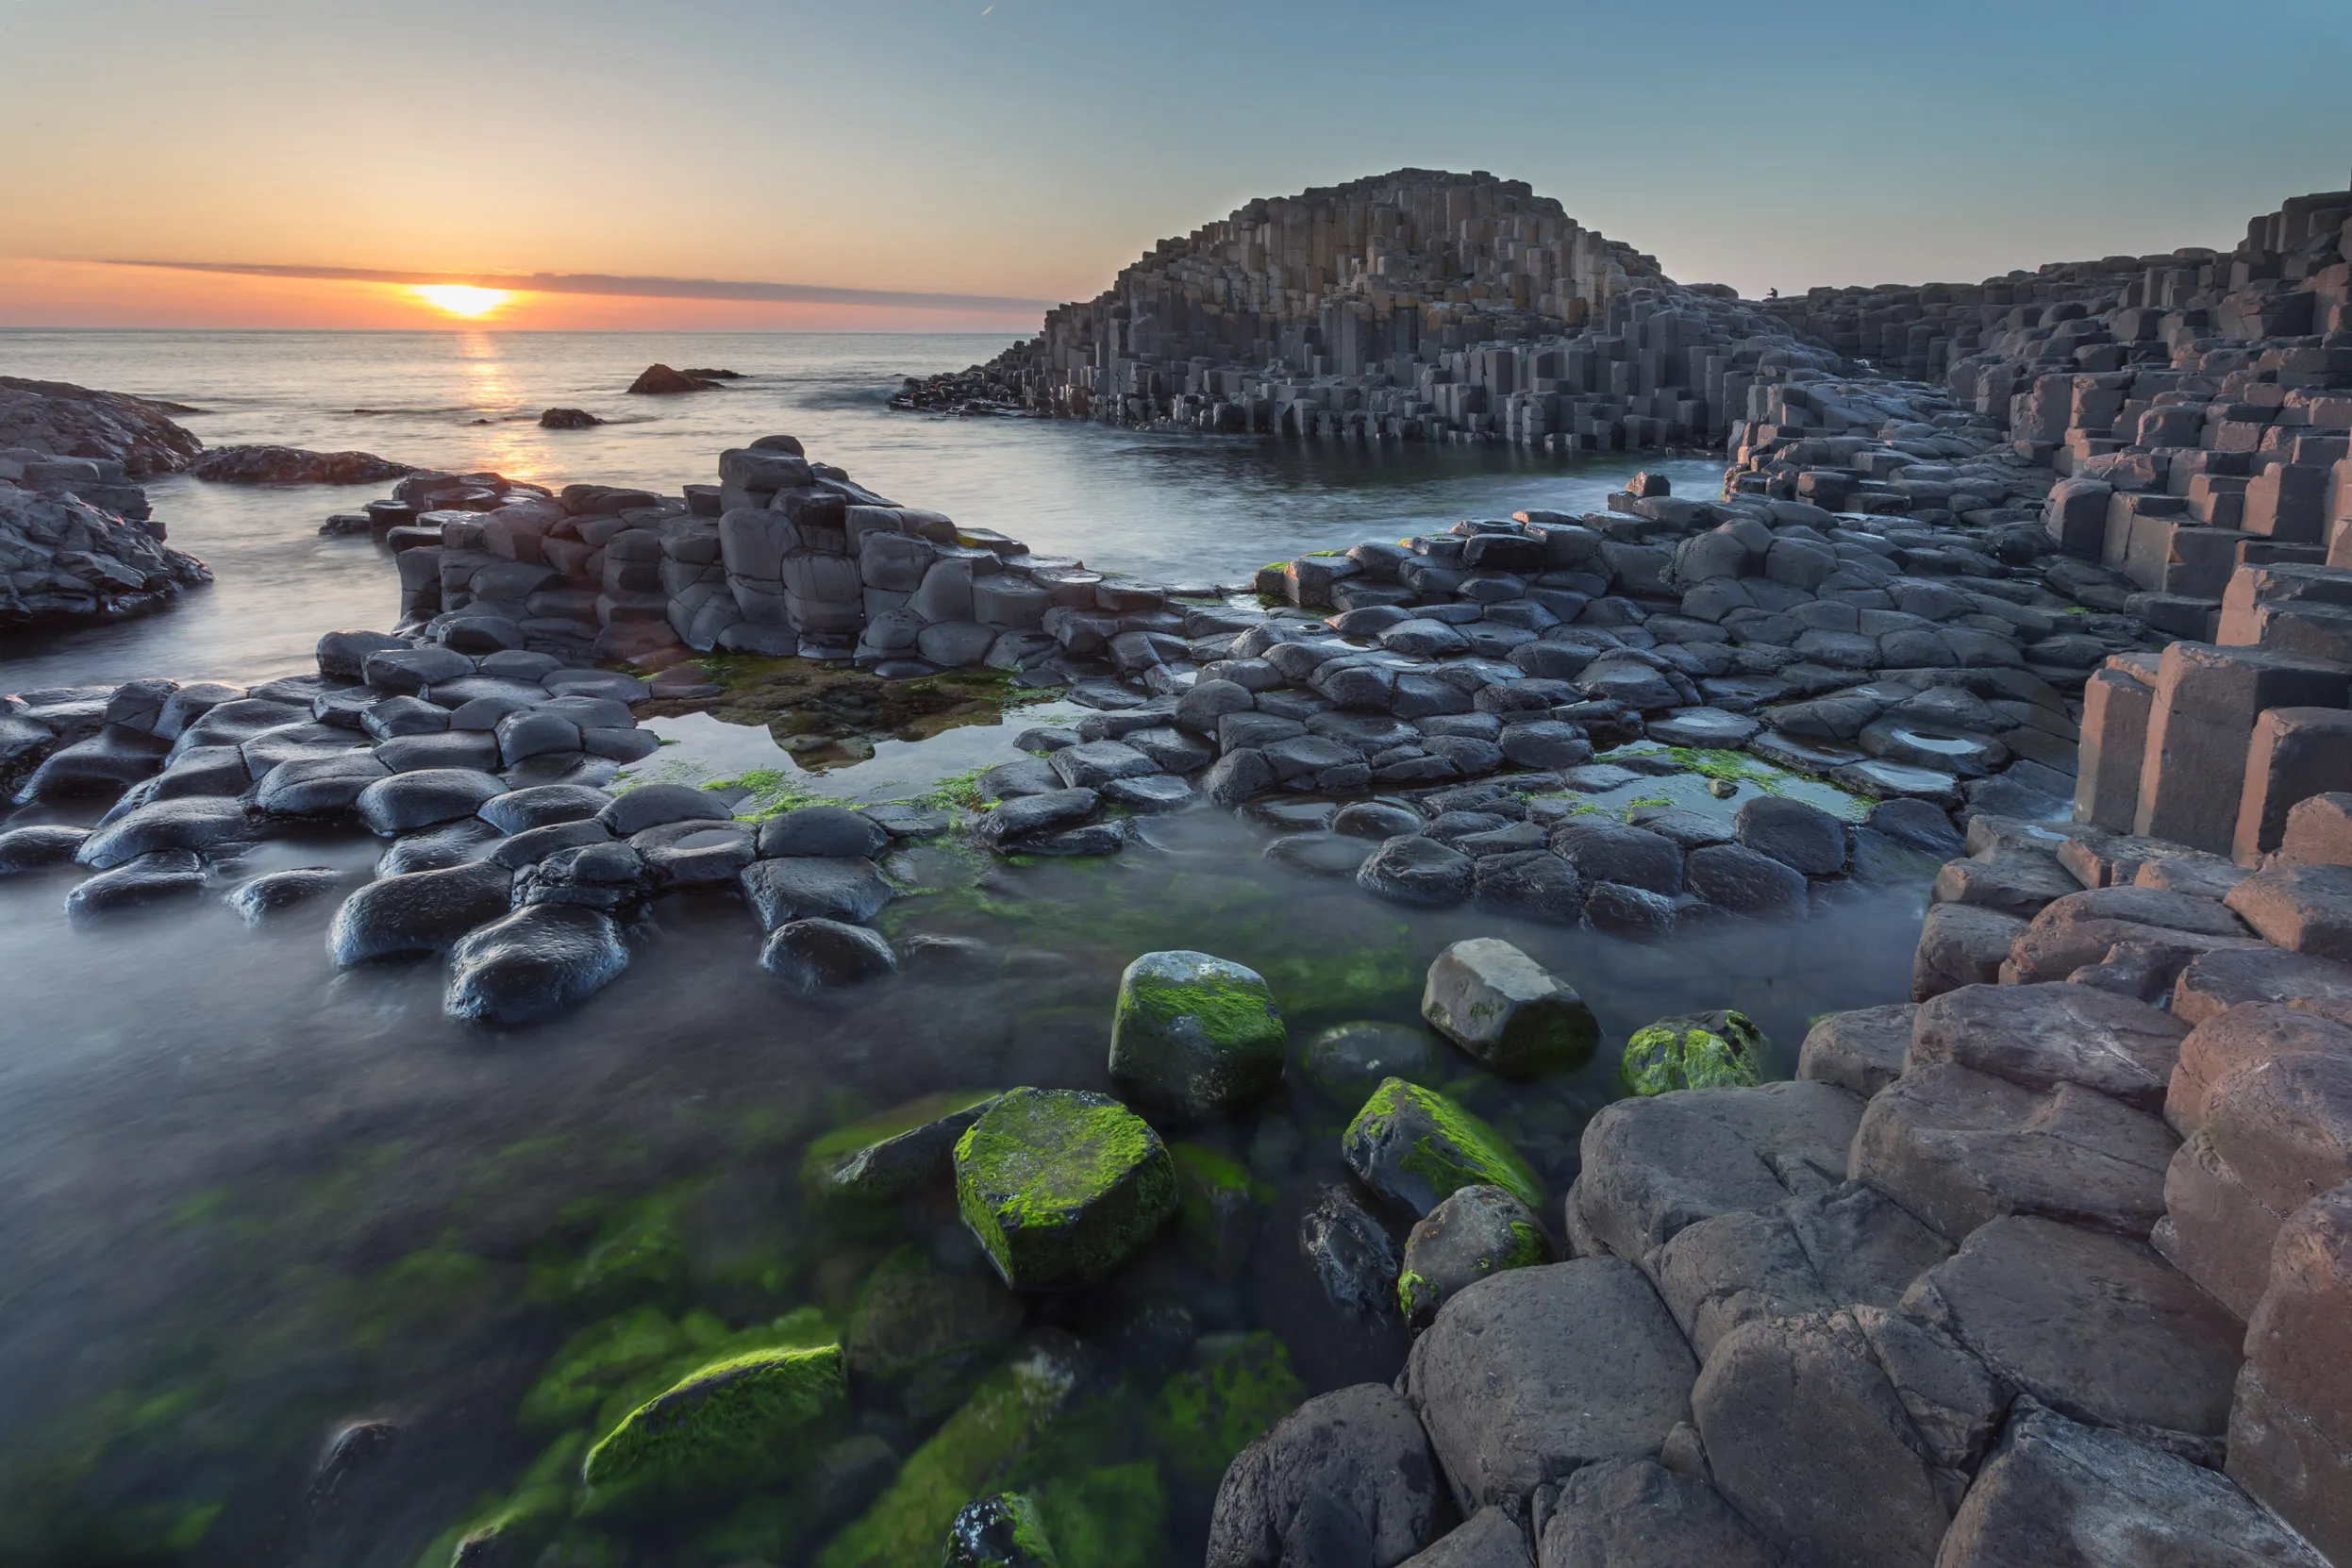 Sun sets over Giant's Causeway filling the sky with orange tones.